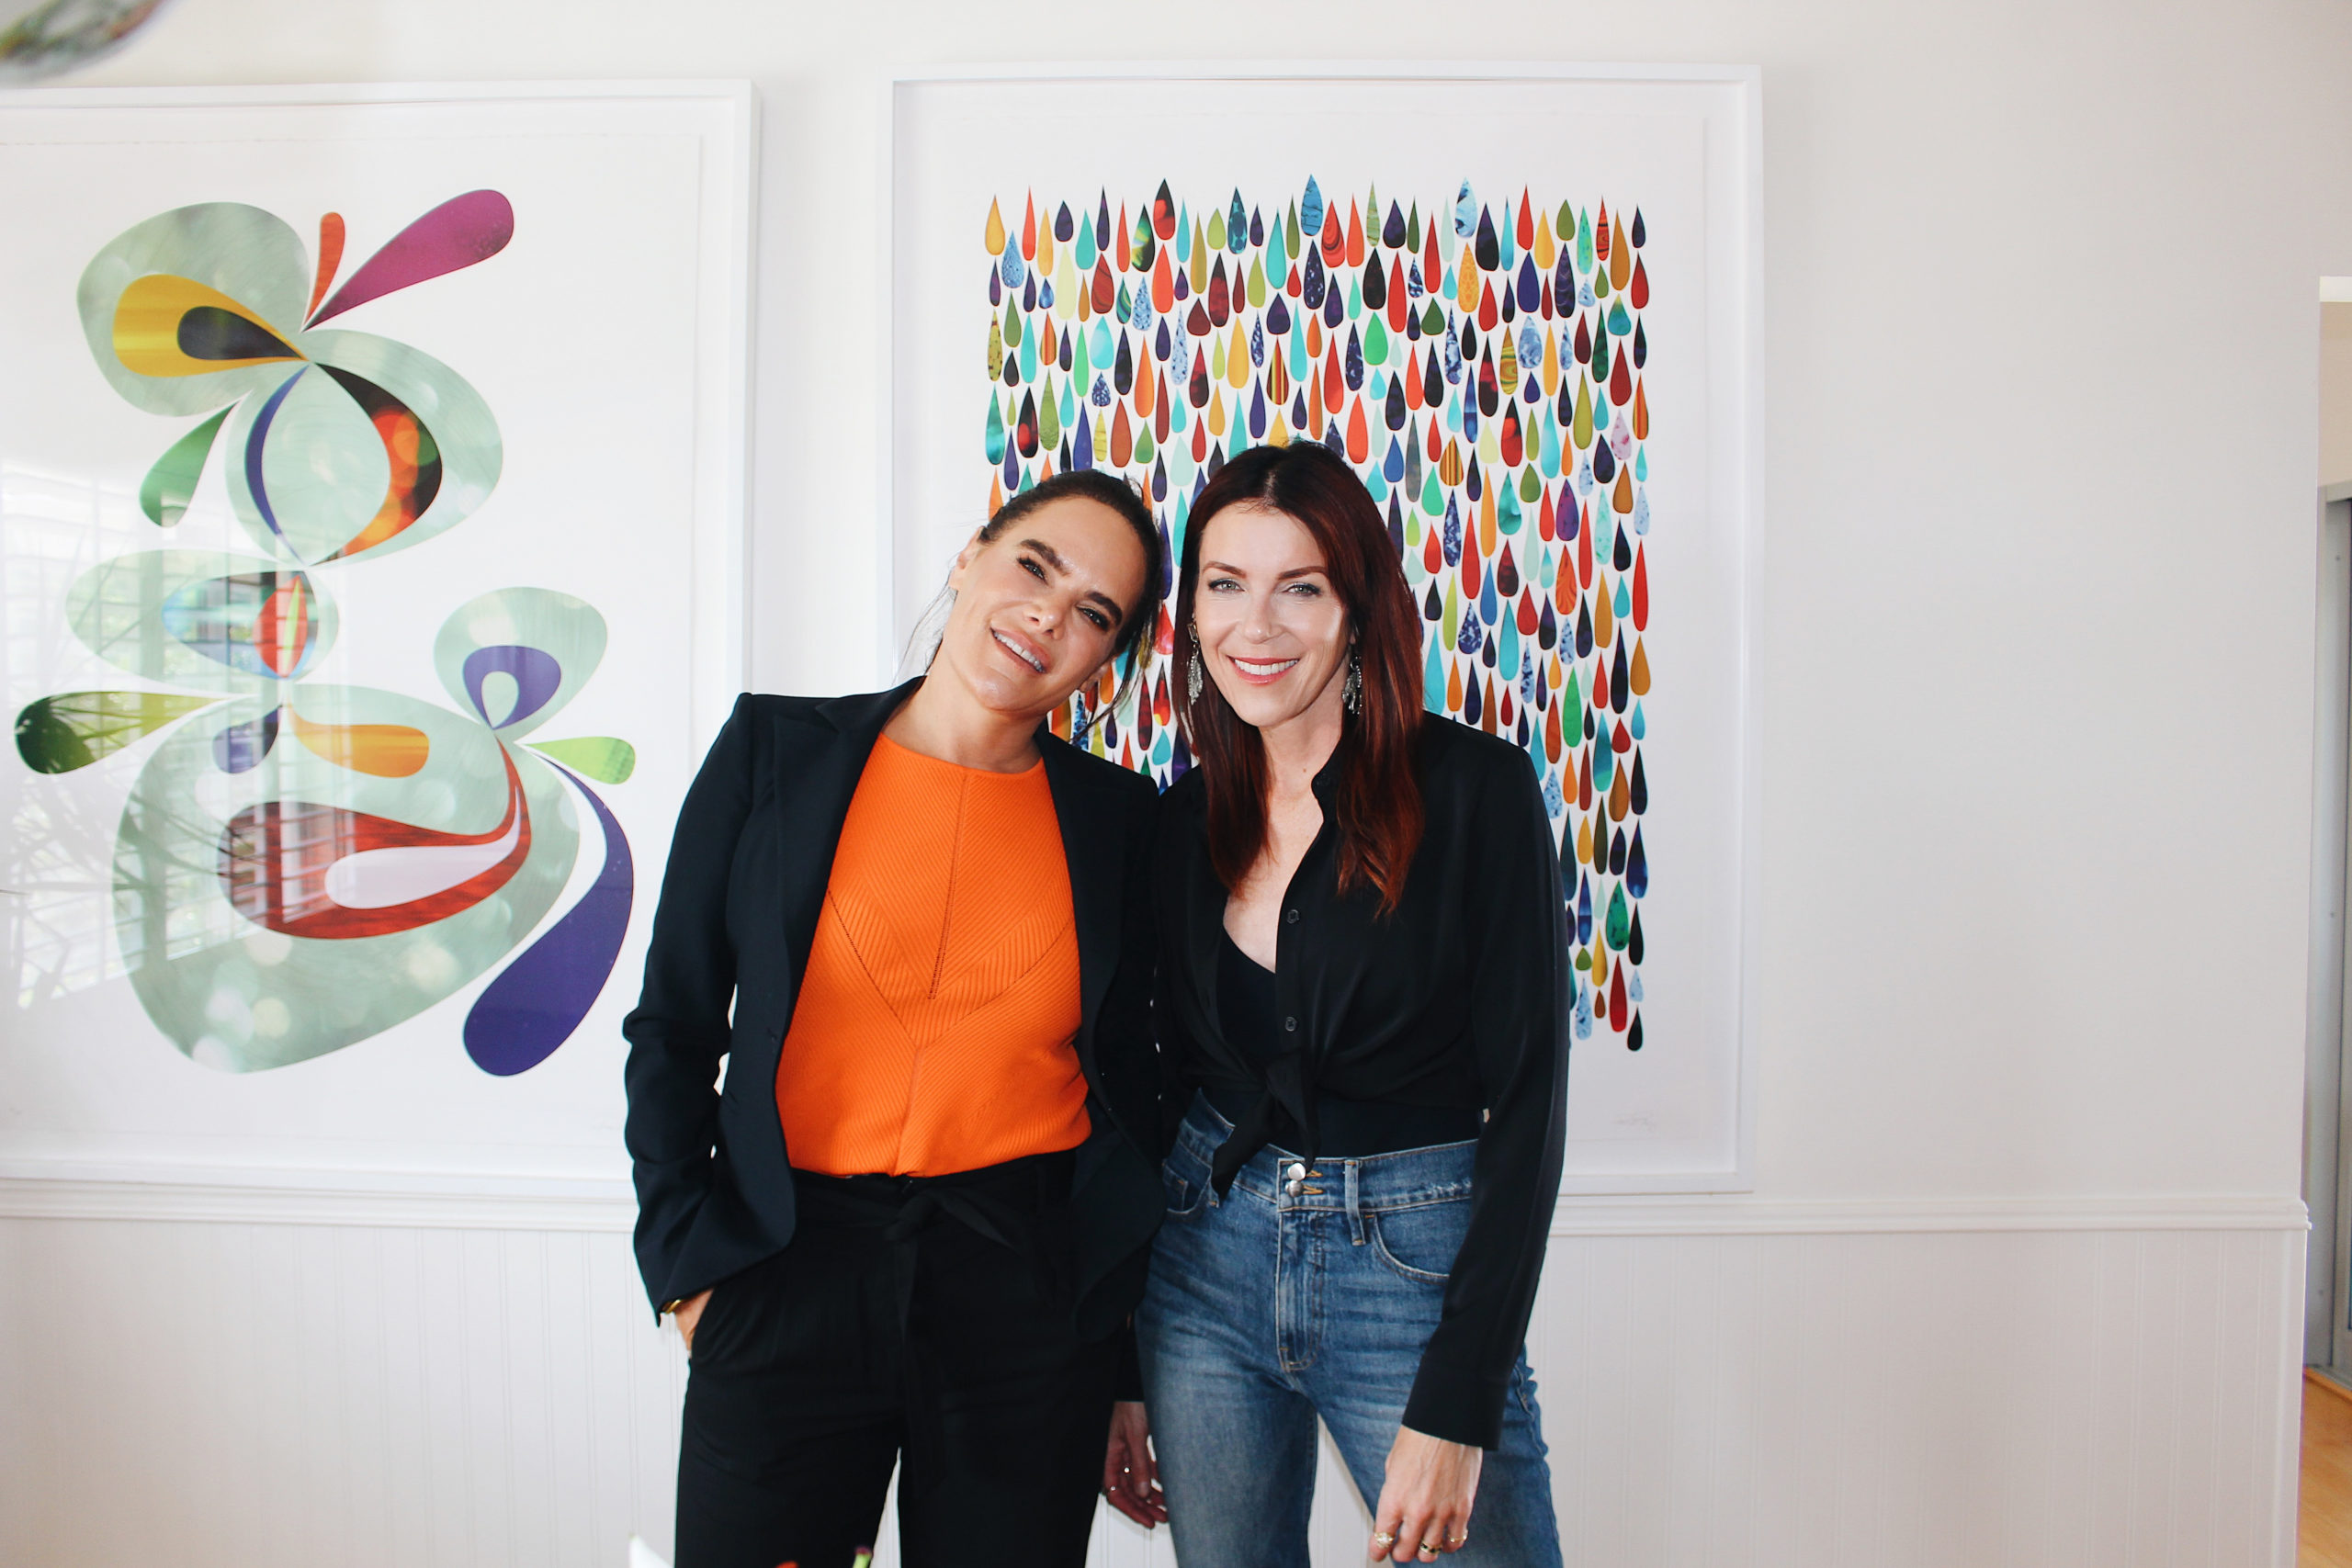 Two white women with brown hair smile at the camera in front of colorful art